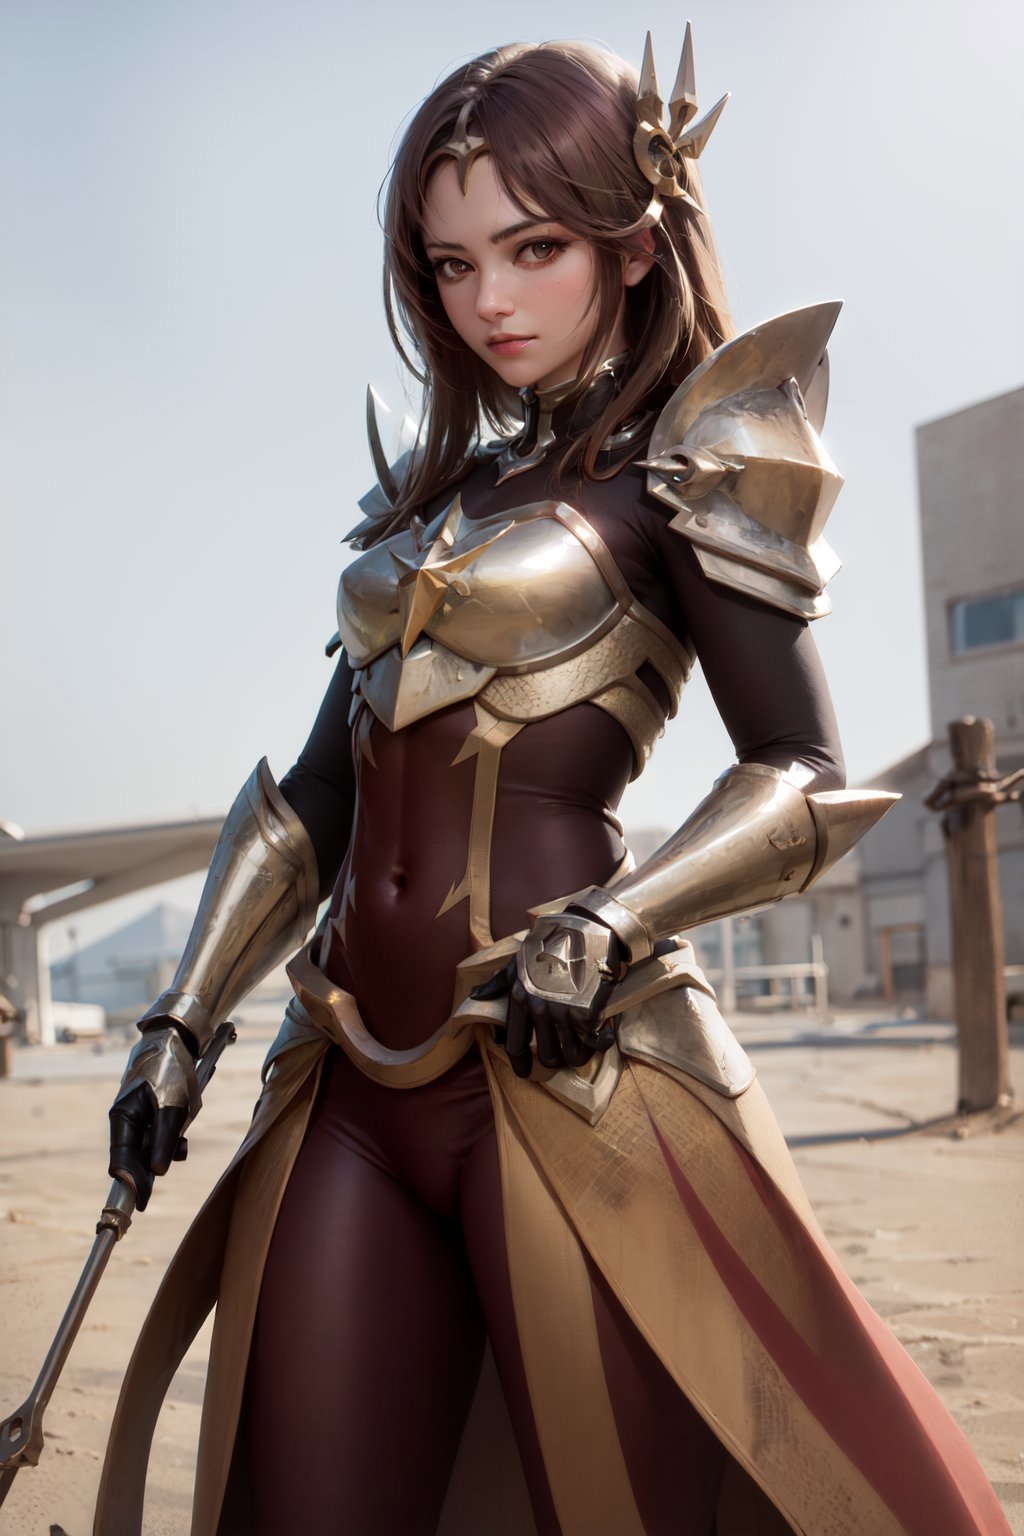 Leona | League of Legends image by justTNP